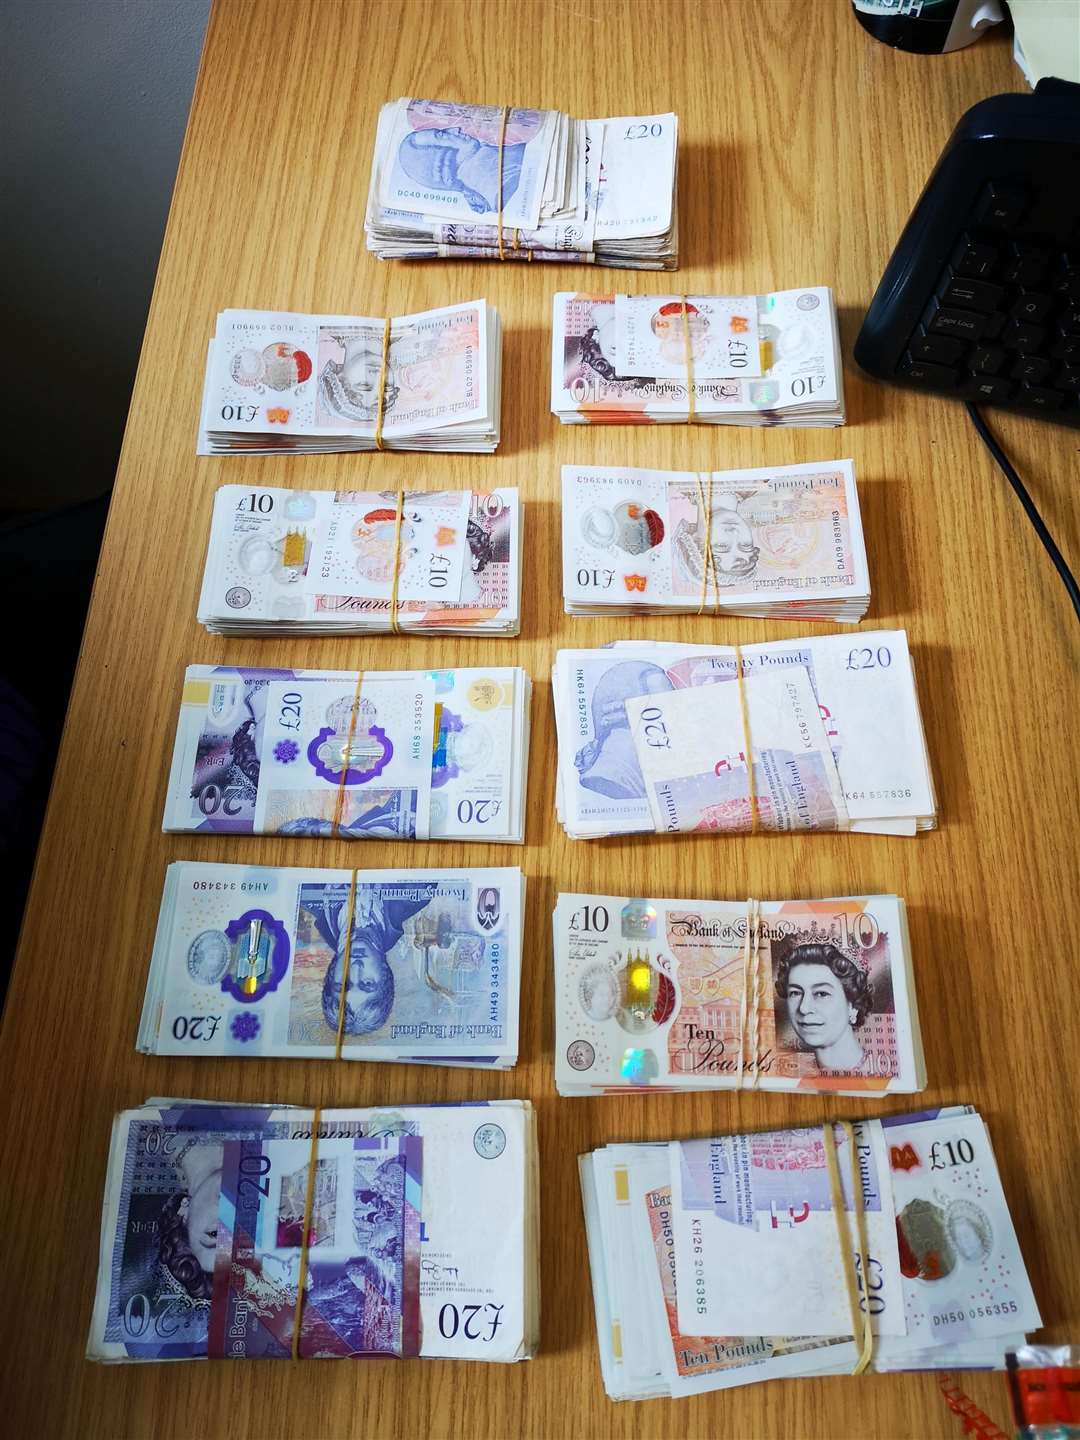 A large amount of cash was later uncovered at his address in Leicester. Picture: Kent Police